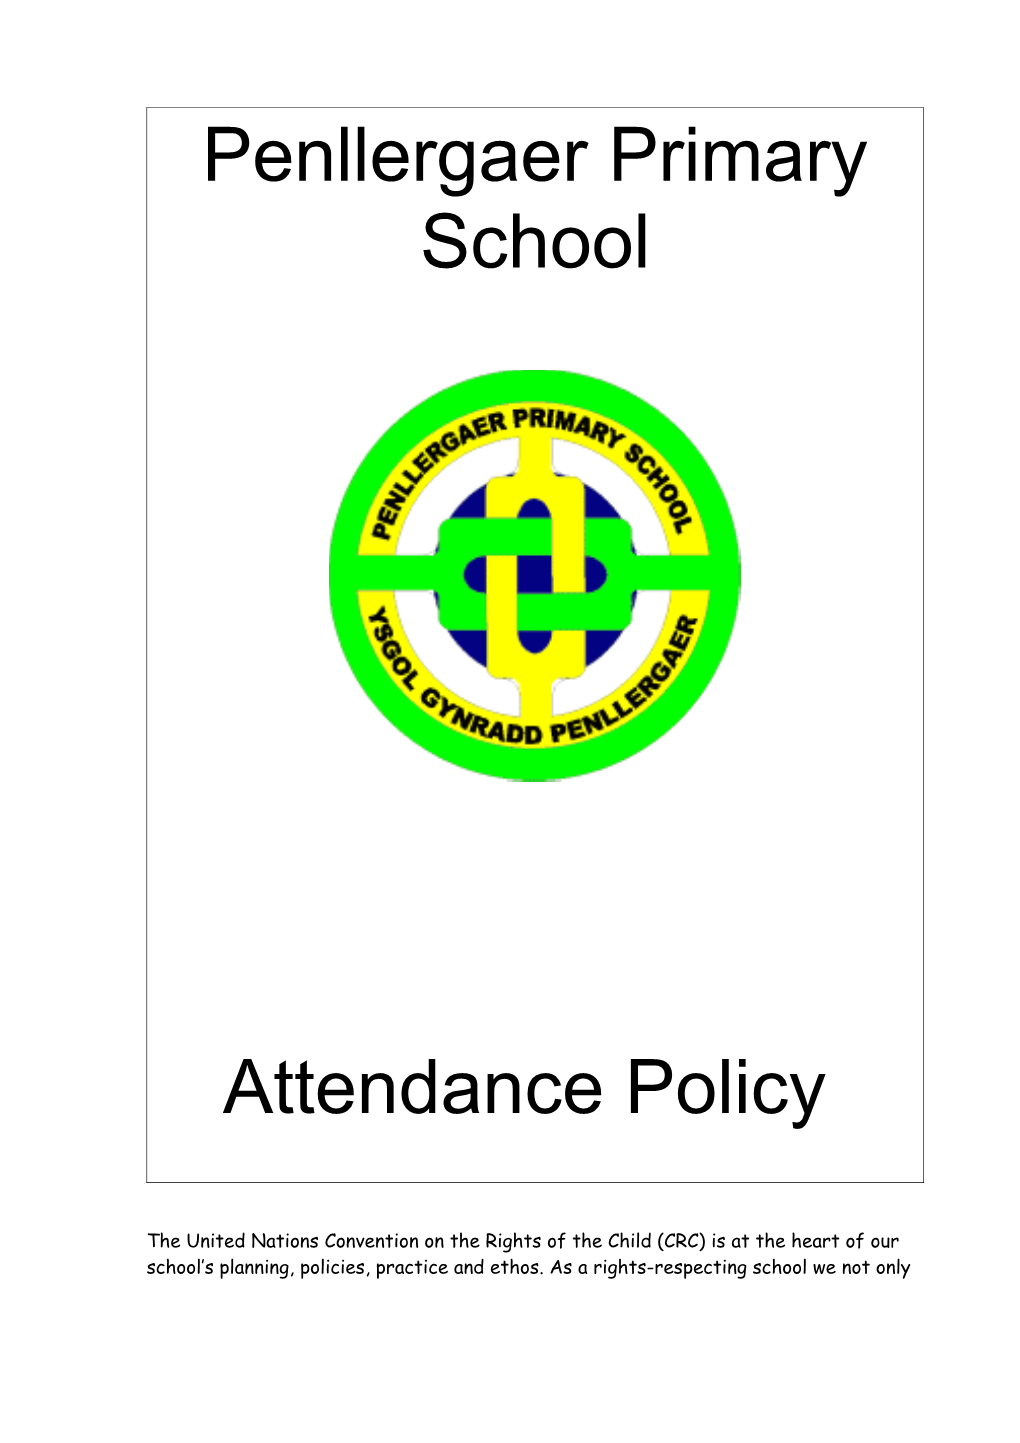 Penllergaer Primary School- Policy for Attendance